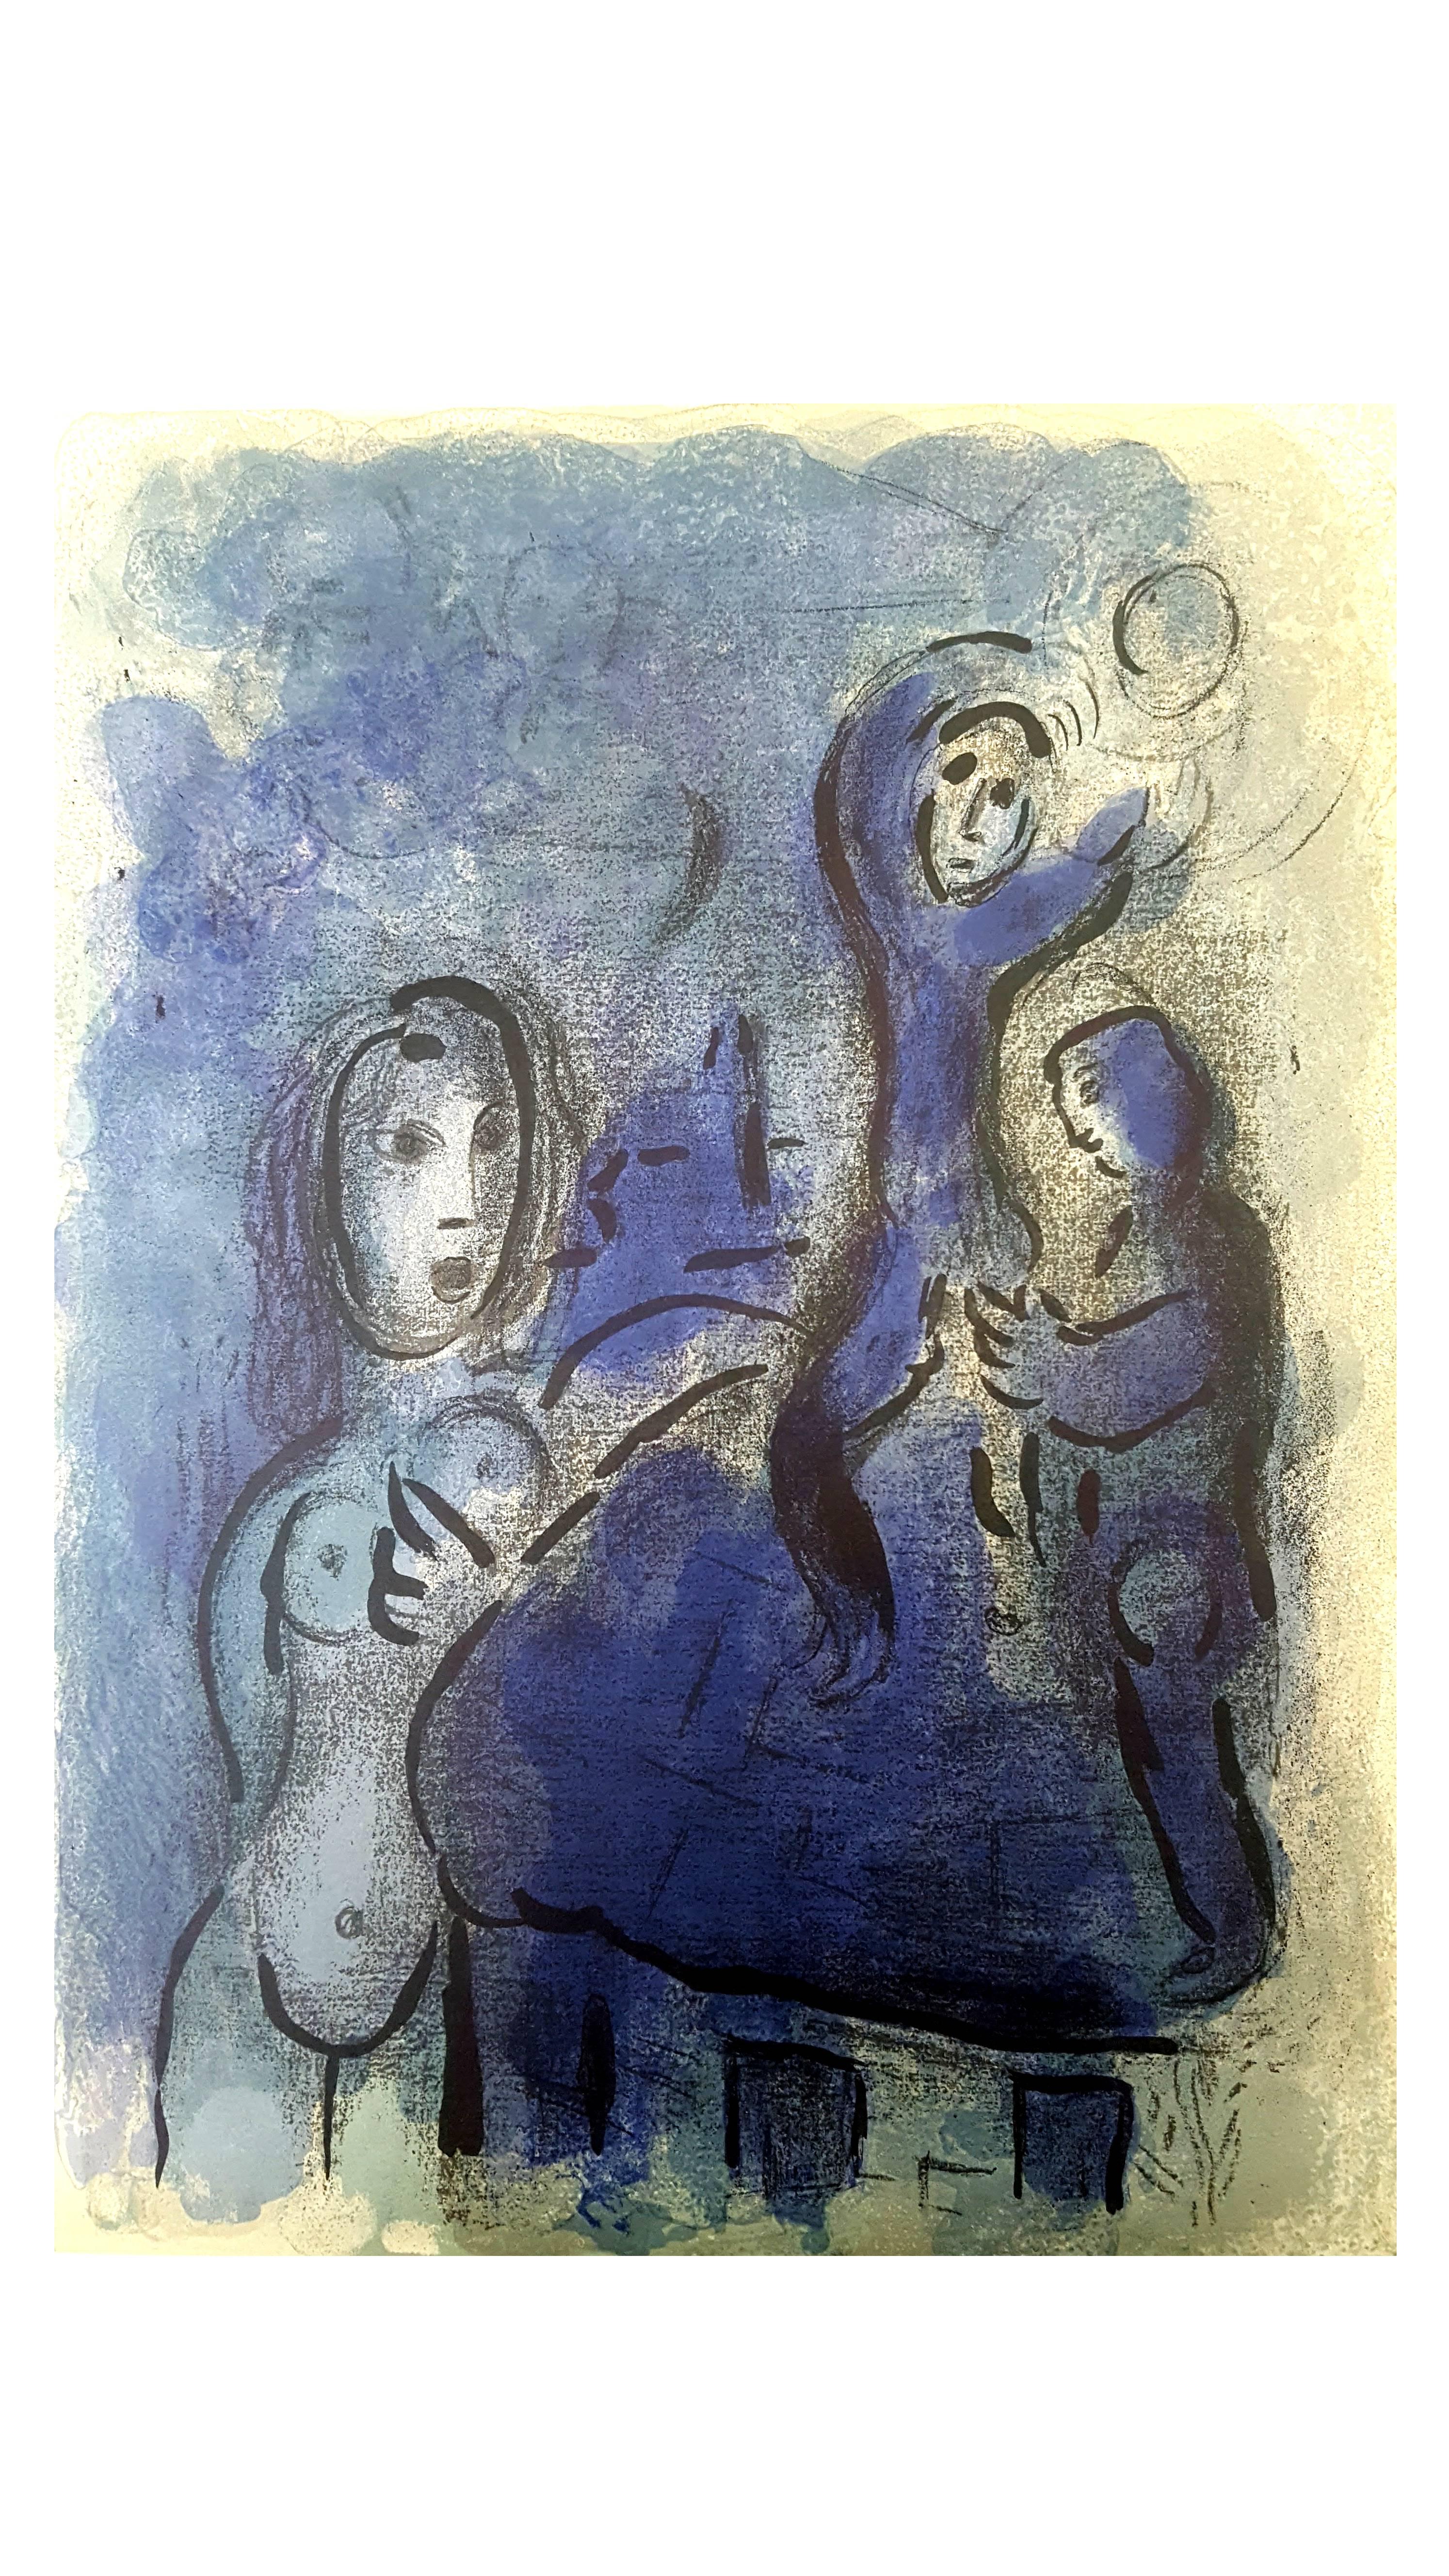 Marc Chagall - The Bible - Rahab and the Spies of Jericho - Original Lithograph